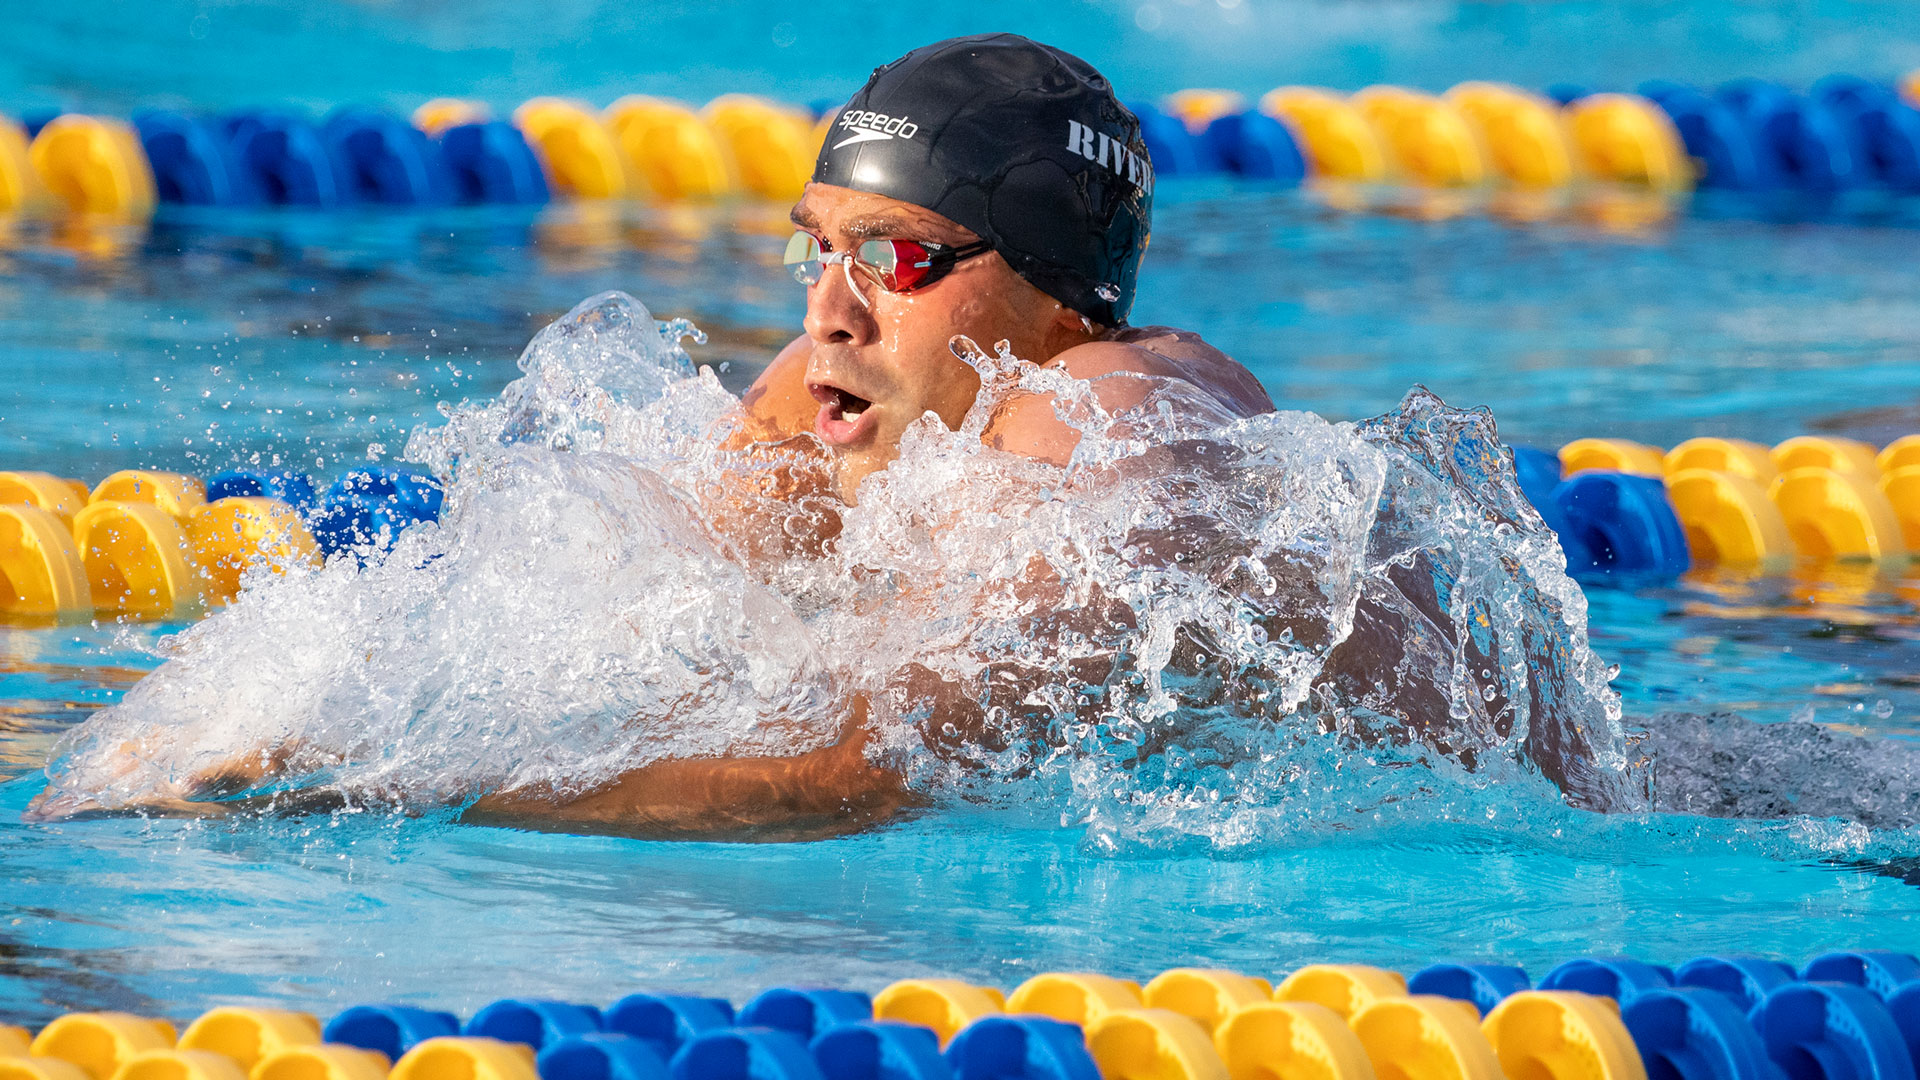 The 2021 NJCAA Swimming and Diving National Championships took place April 28 through May 1, at the Ann Wilder Aquatic Complex on the Indian River State College Massey Campus in Fort Pierce. Aramis Rivera wins the 200 Yard IM Wednesday, April 28.